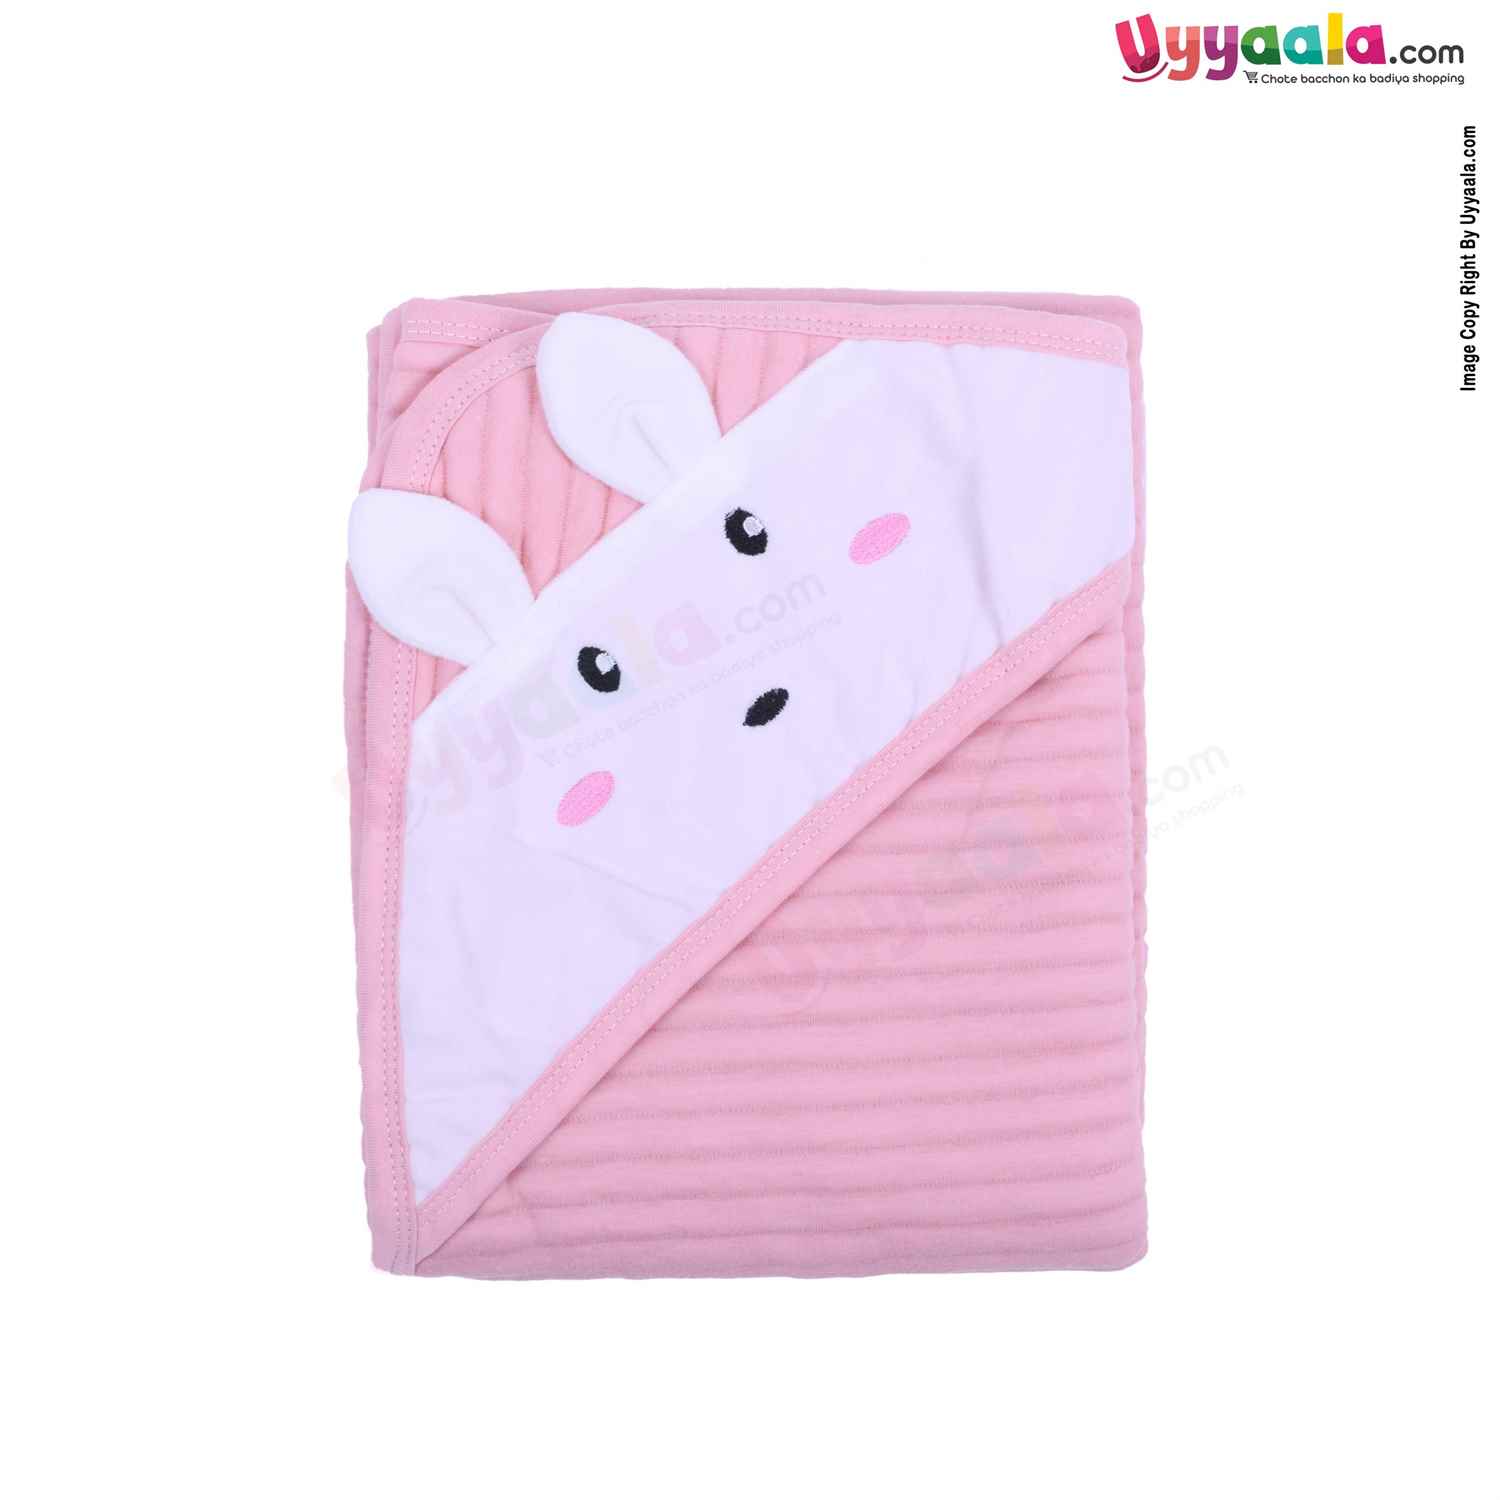 Thermal Hood Blanket Rabbit Character 0-24m Age,Pink